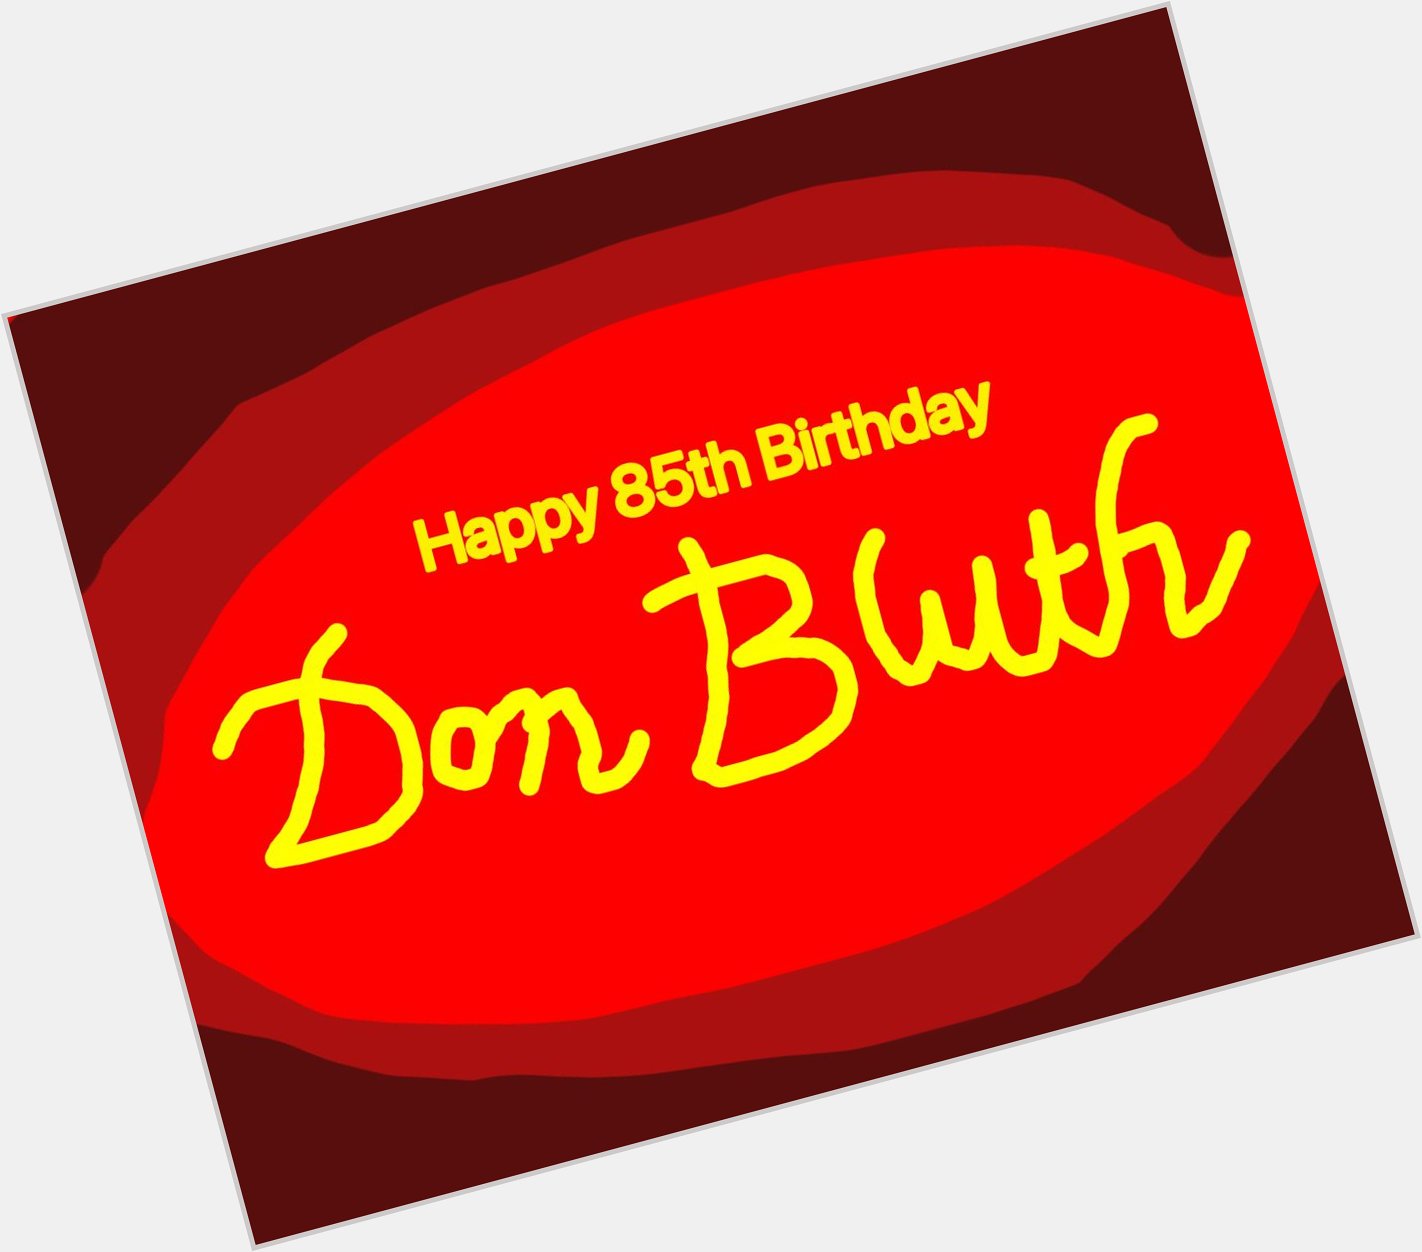 Happy 85th Birthday to Don Bluth! 